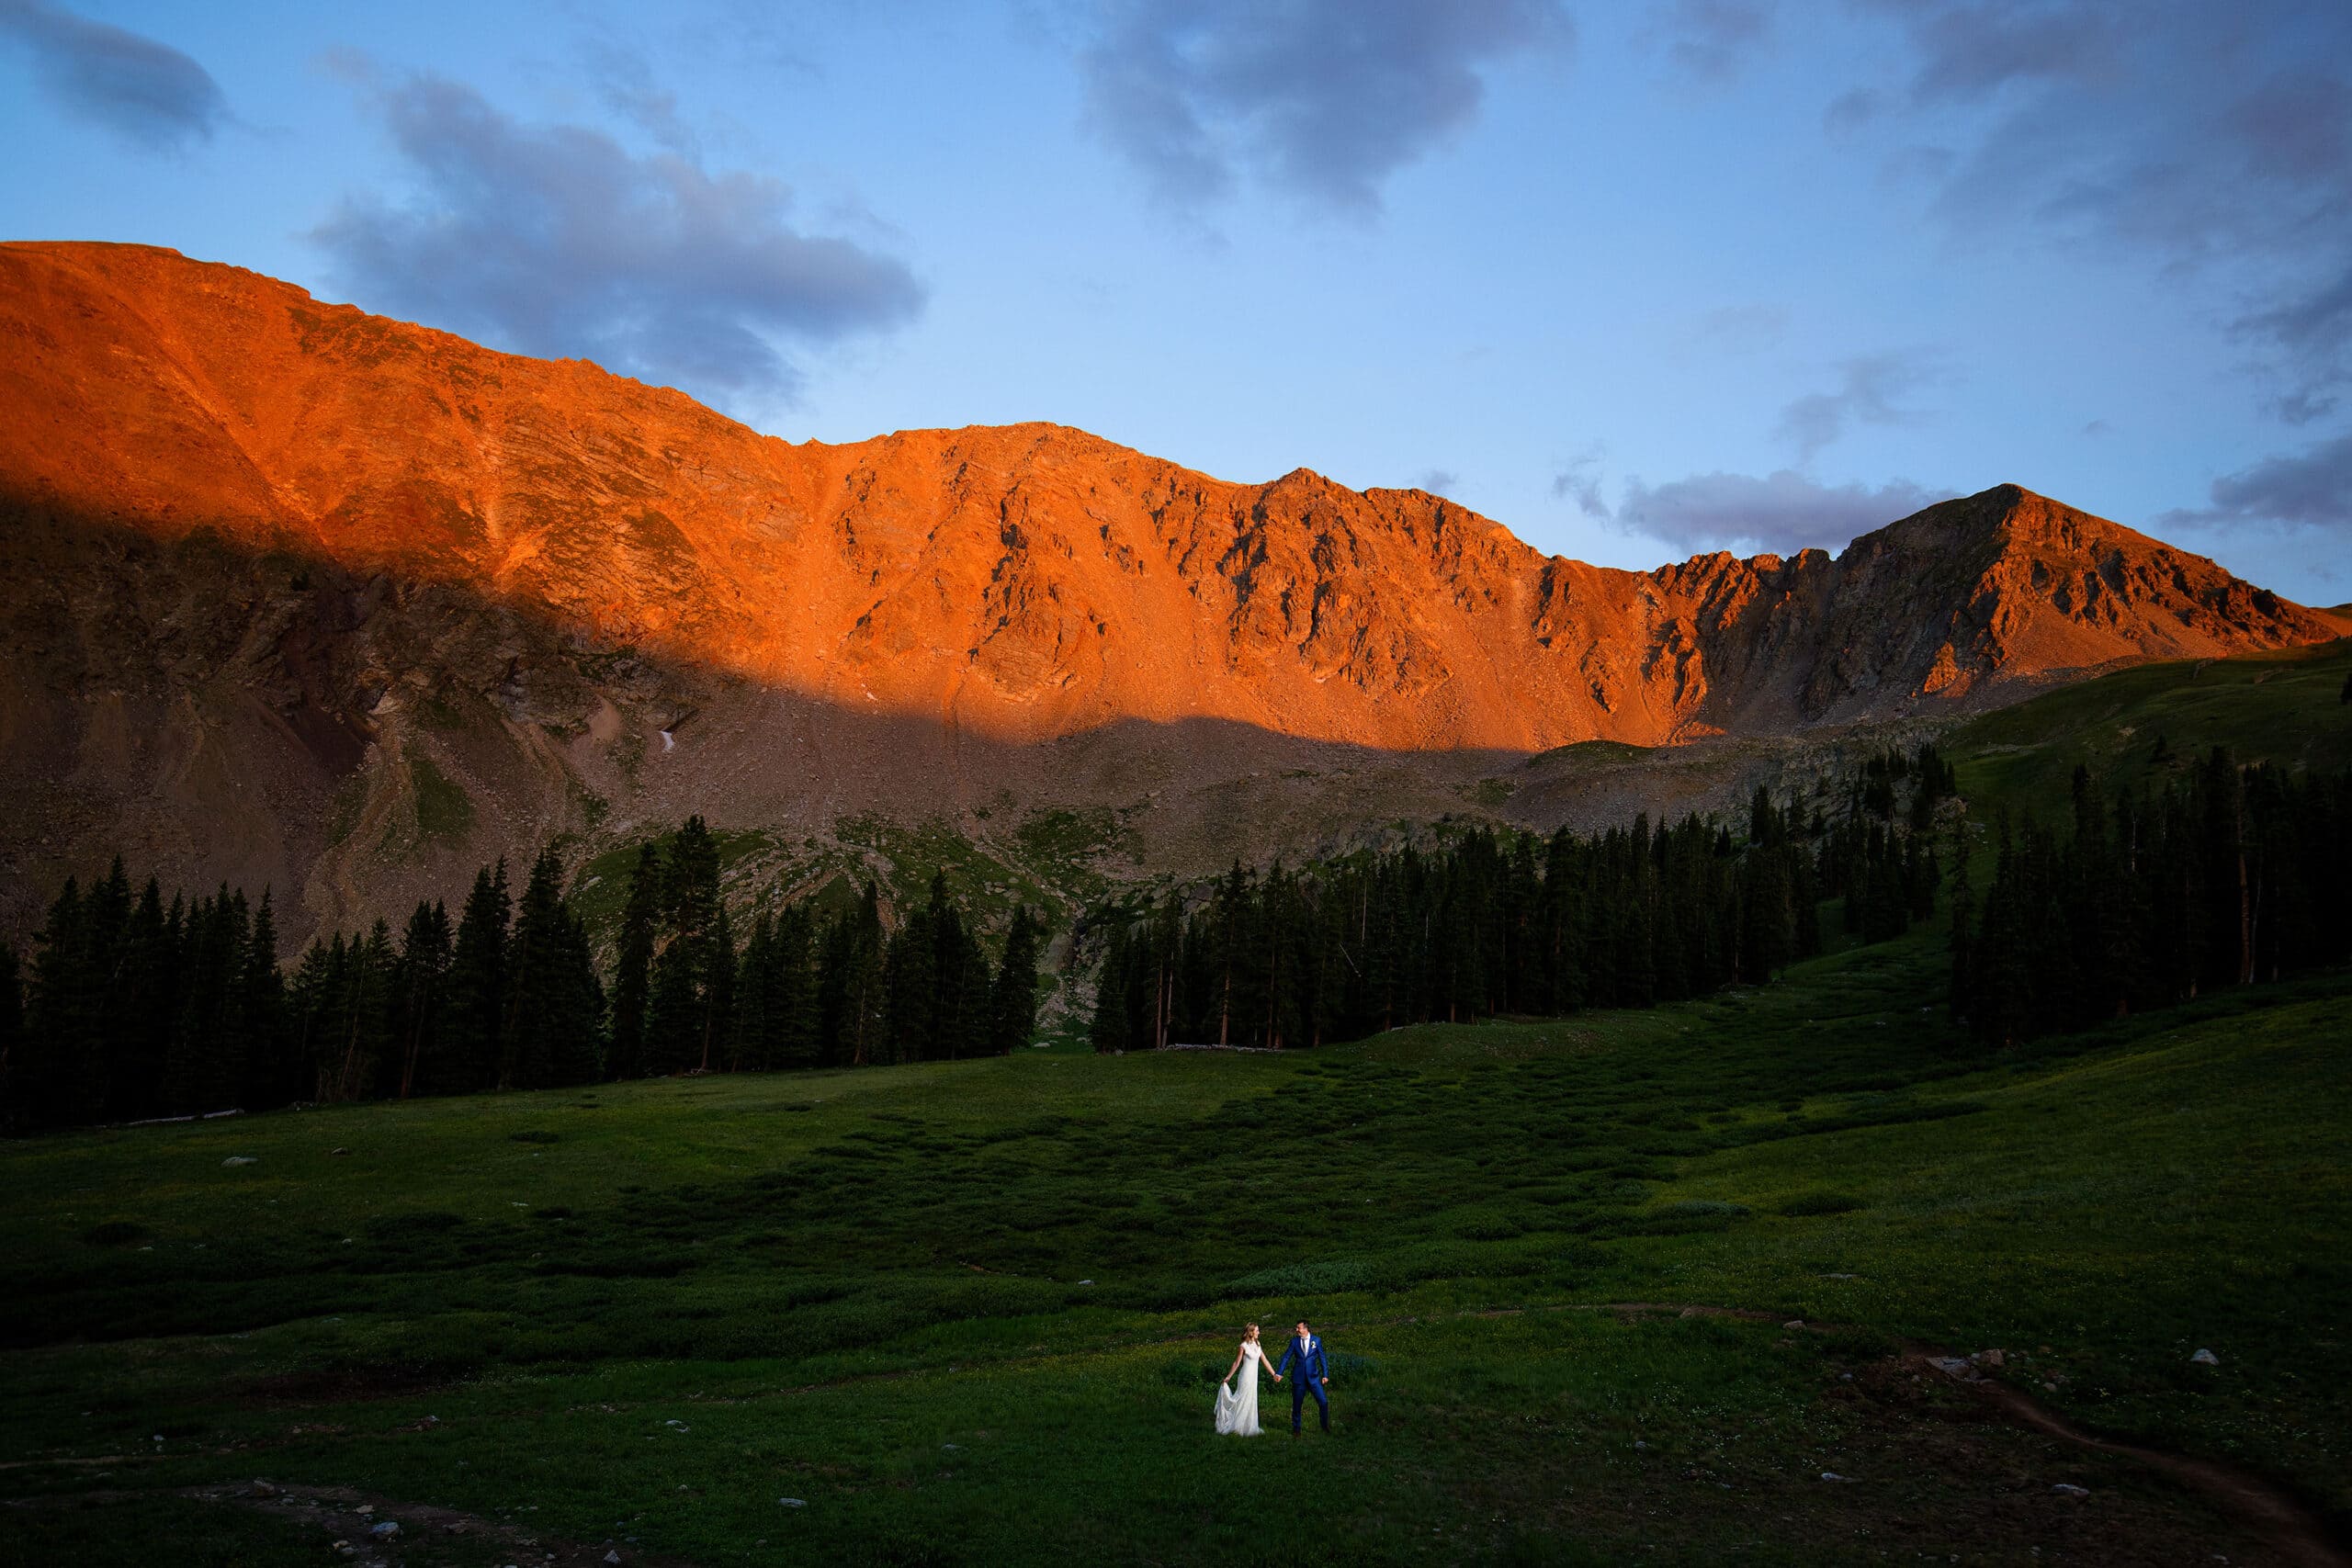 Keely and Steven pose as alpenglow illuminates the East Wall at Arapahoe Basin during their wedding day